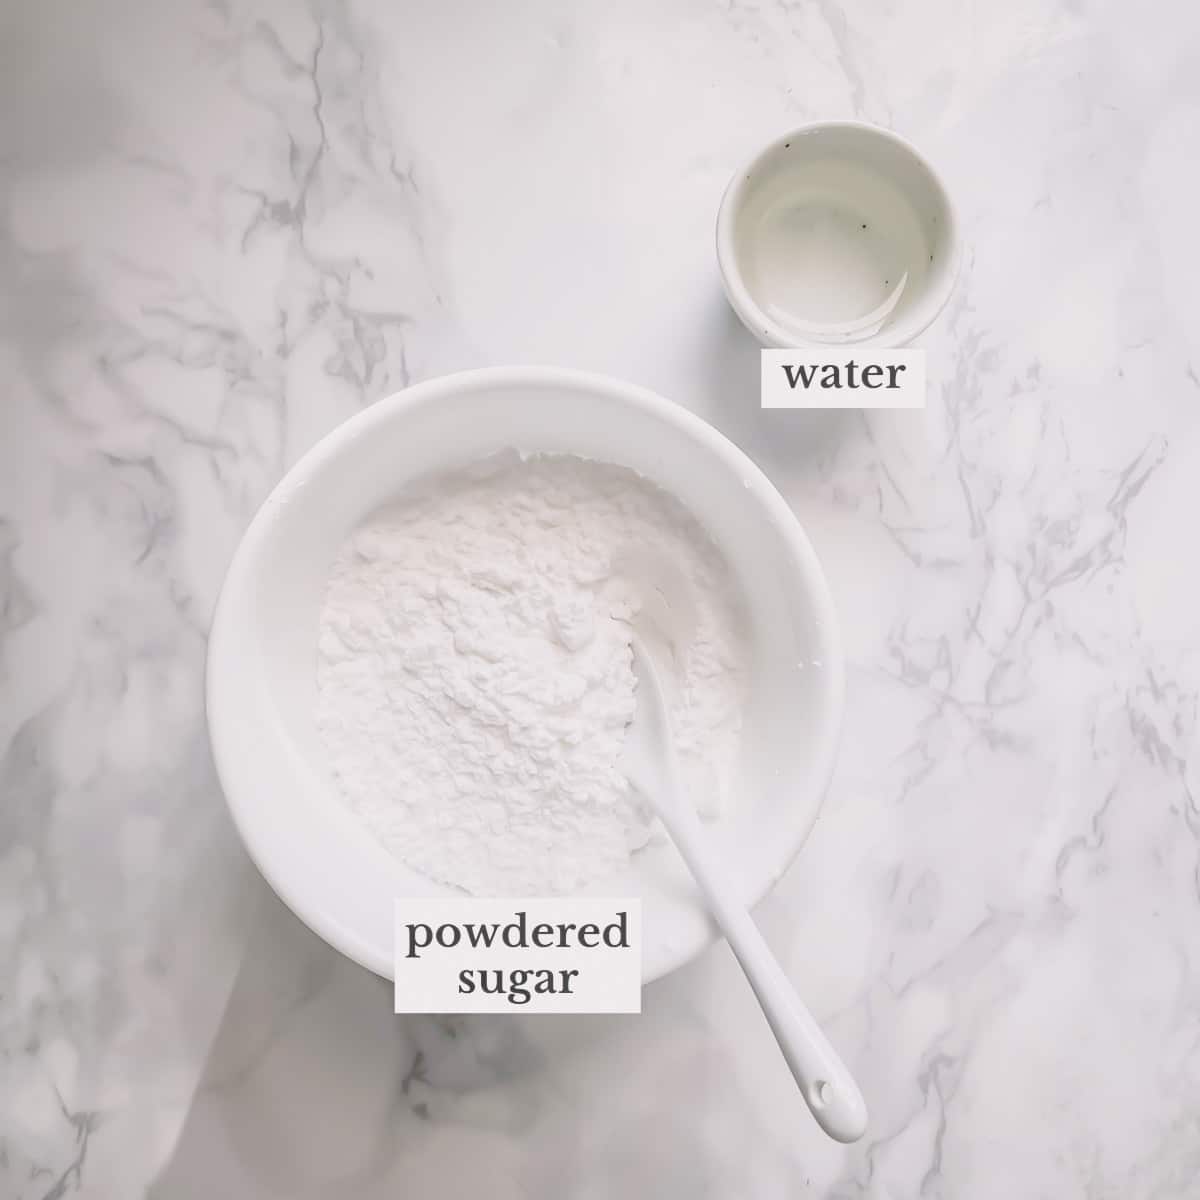 Powedered sugar and water in separate bowls.